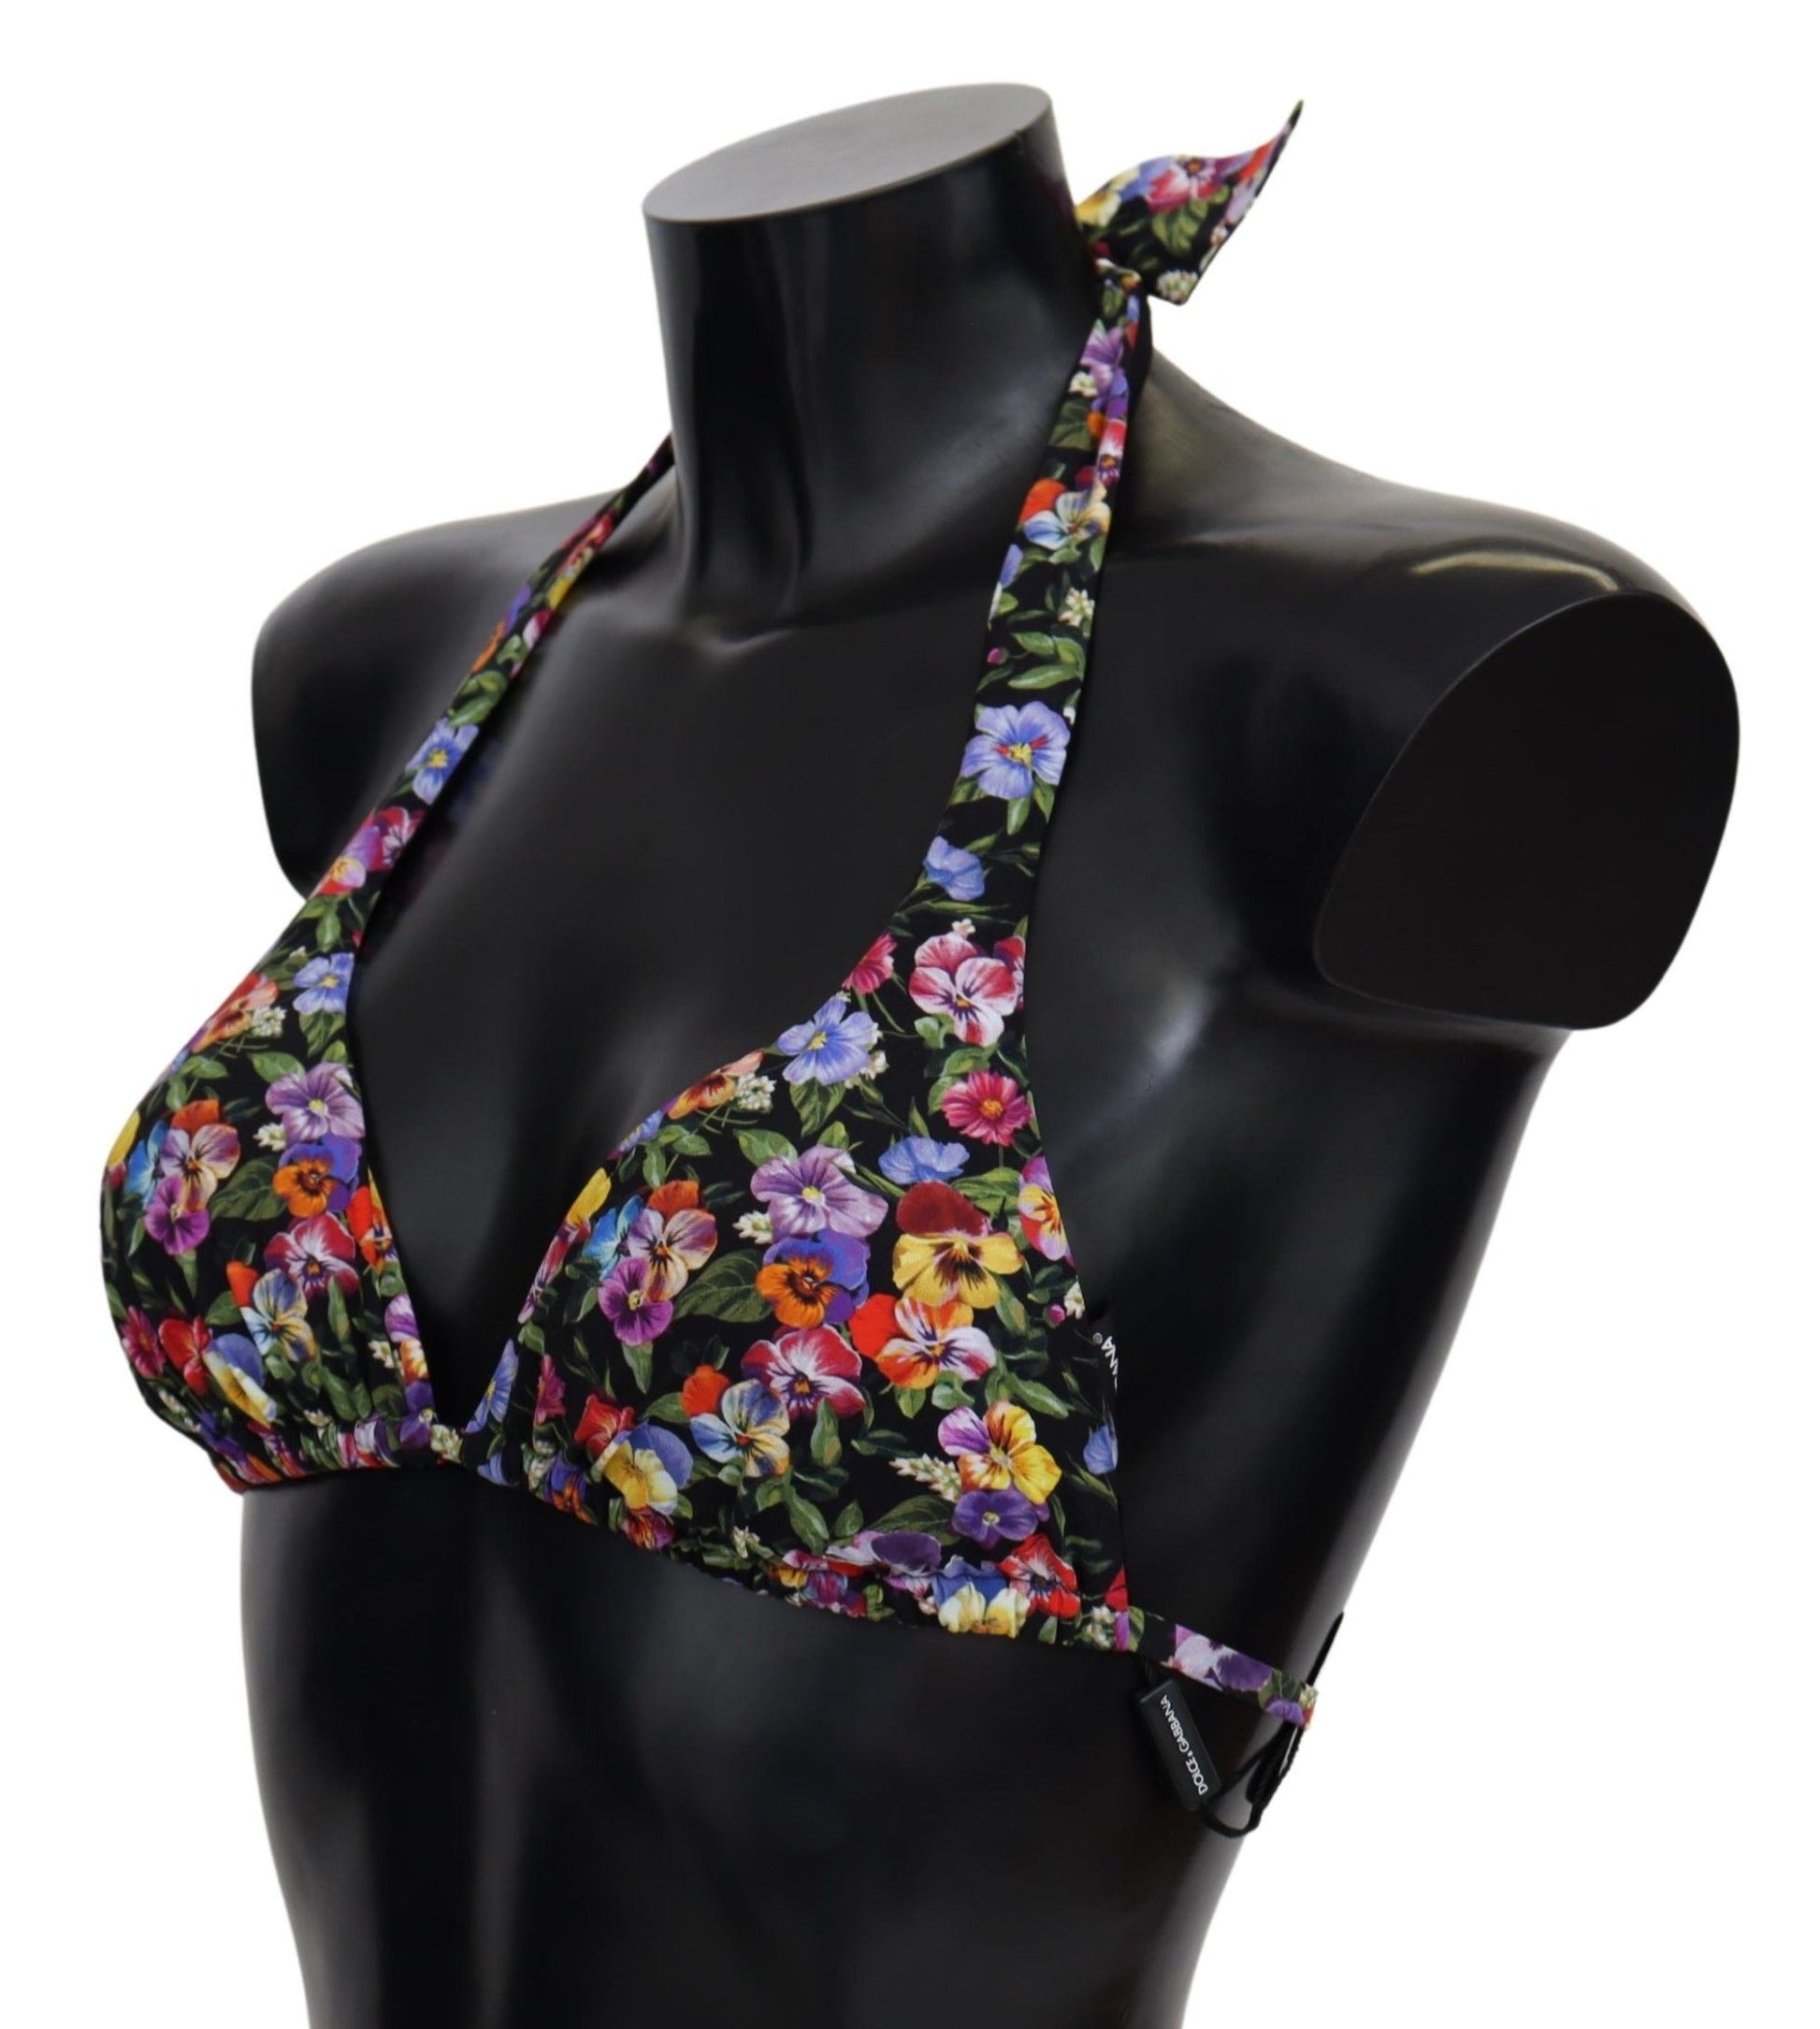 Black Floral Print Swimsuit Beachwear Bikini Tops - Designed by Dolce & Gabbana Available to Buy at a Discounted Price on Moon Behind The Hill Online Designer Discount Store